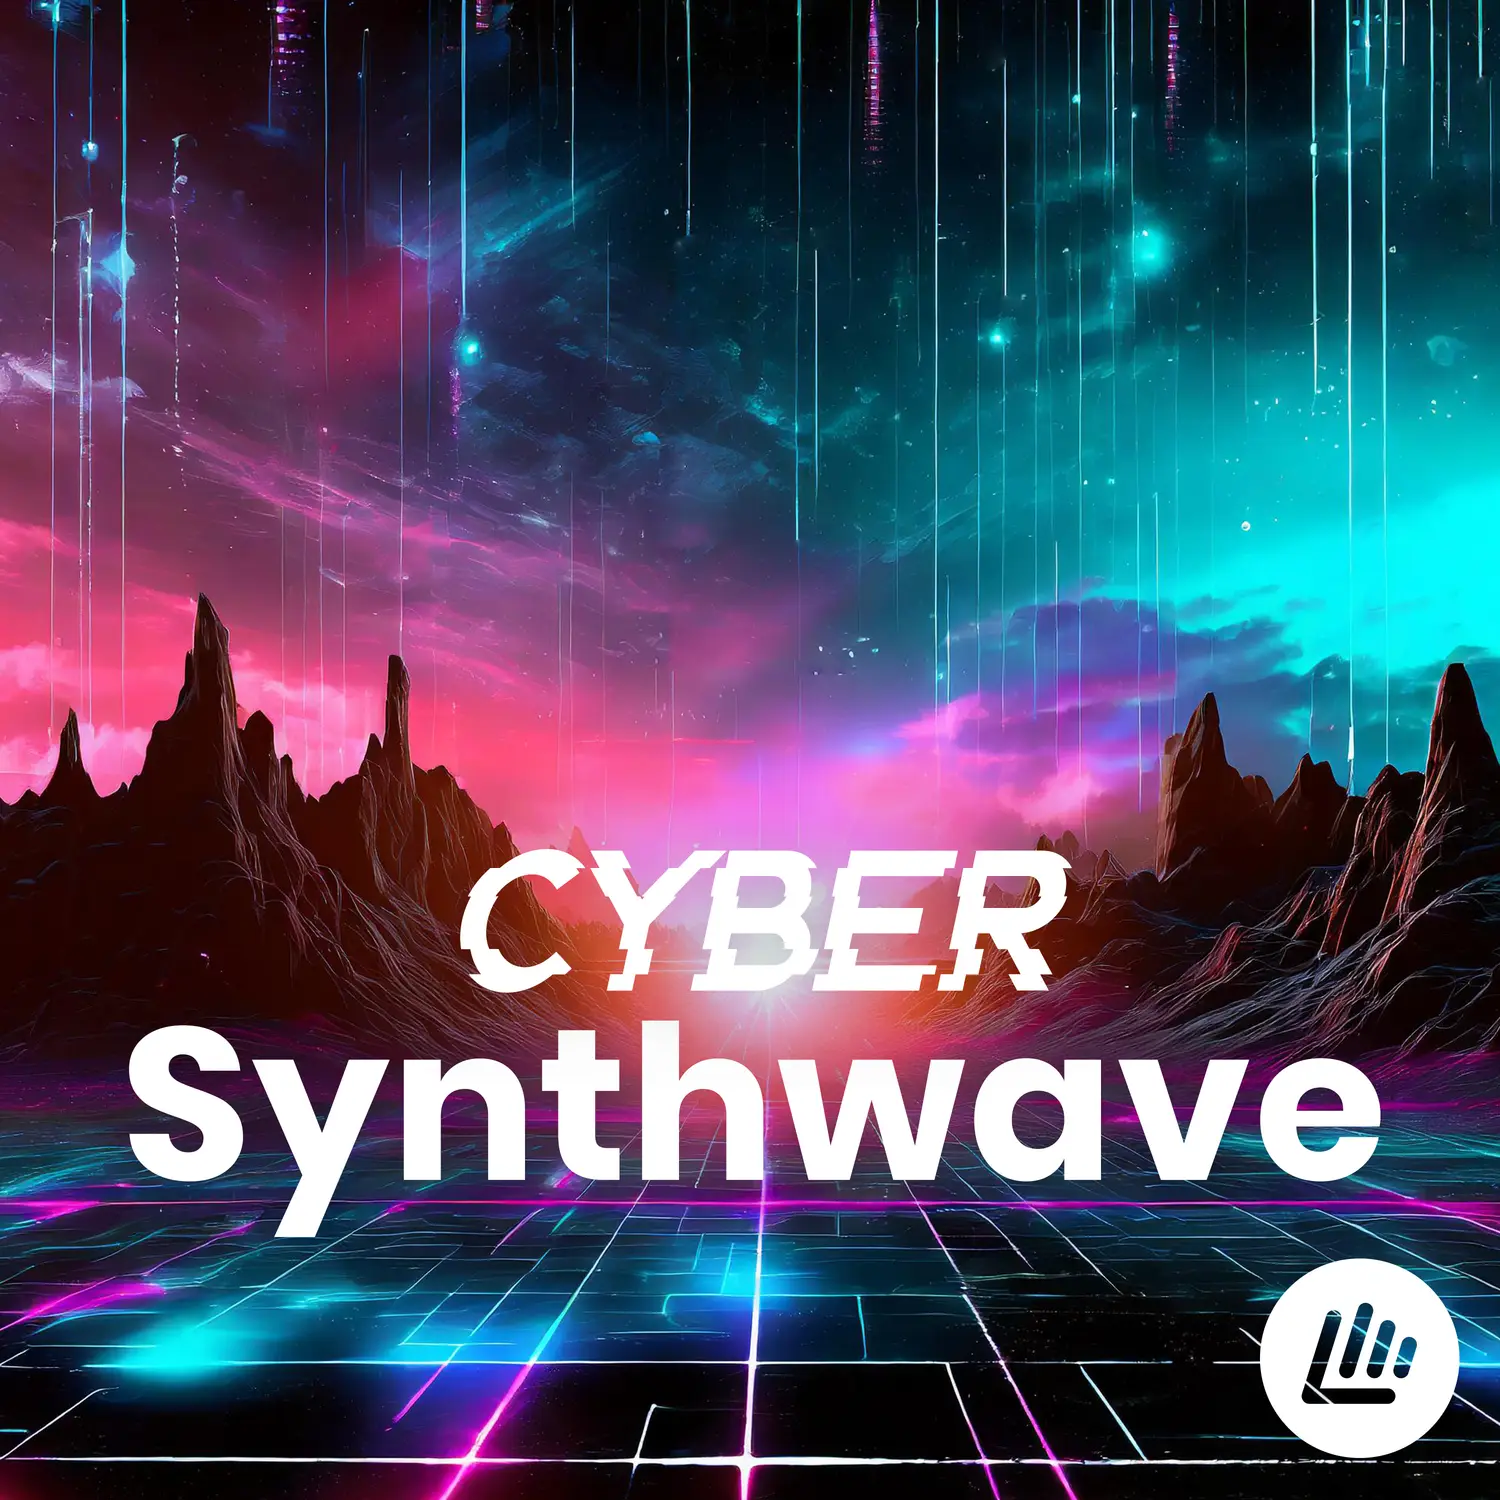 Cyber synthwave